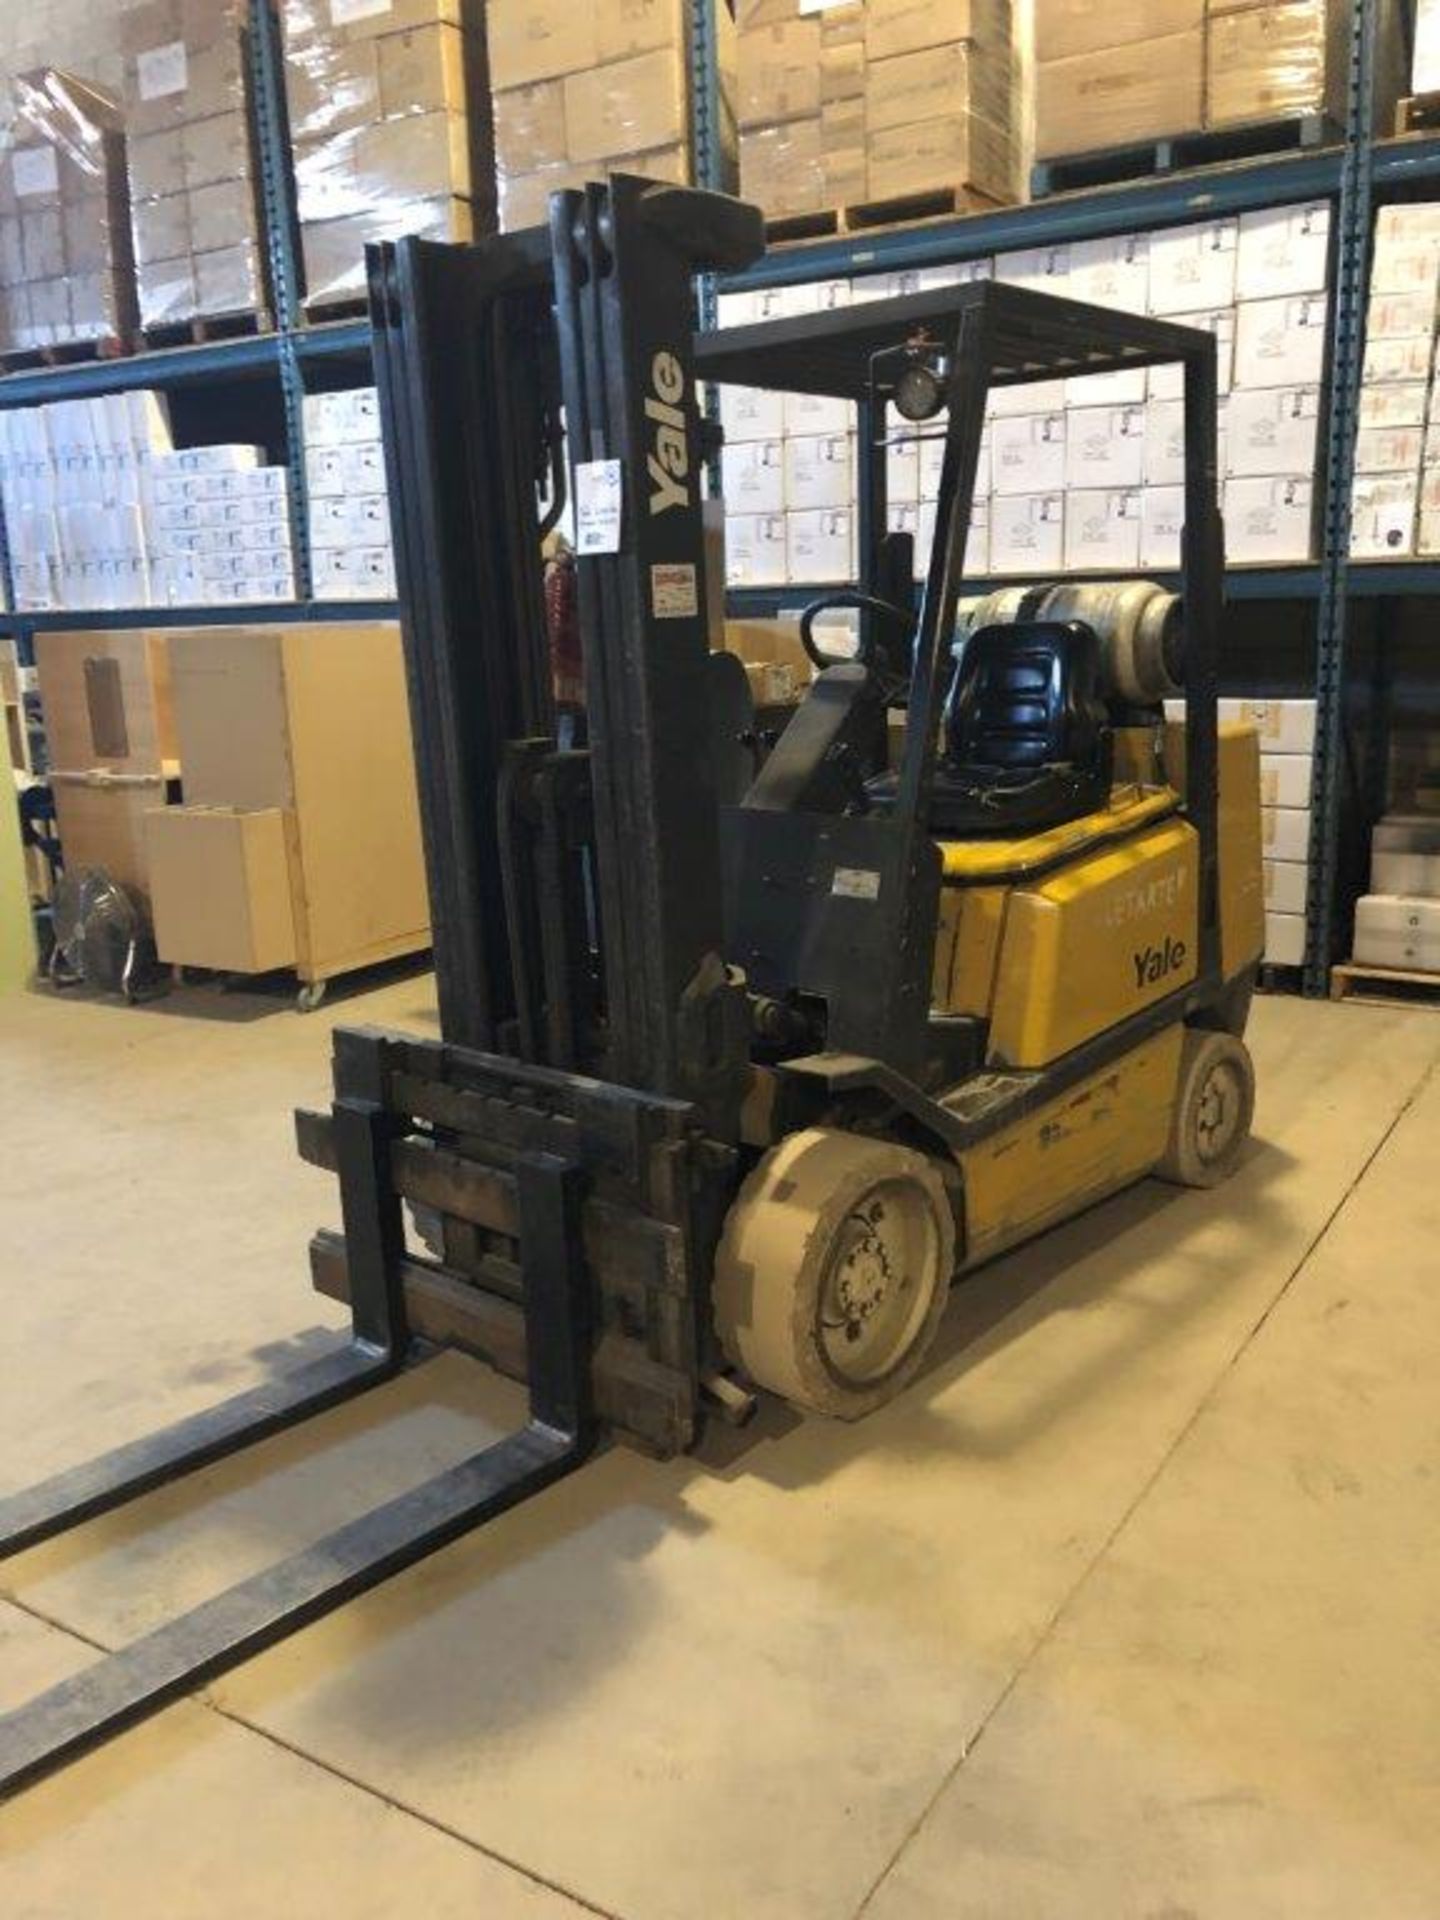 Yale,6000 lbs,propane forklift